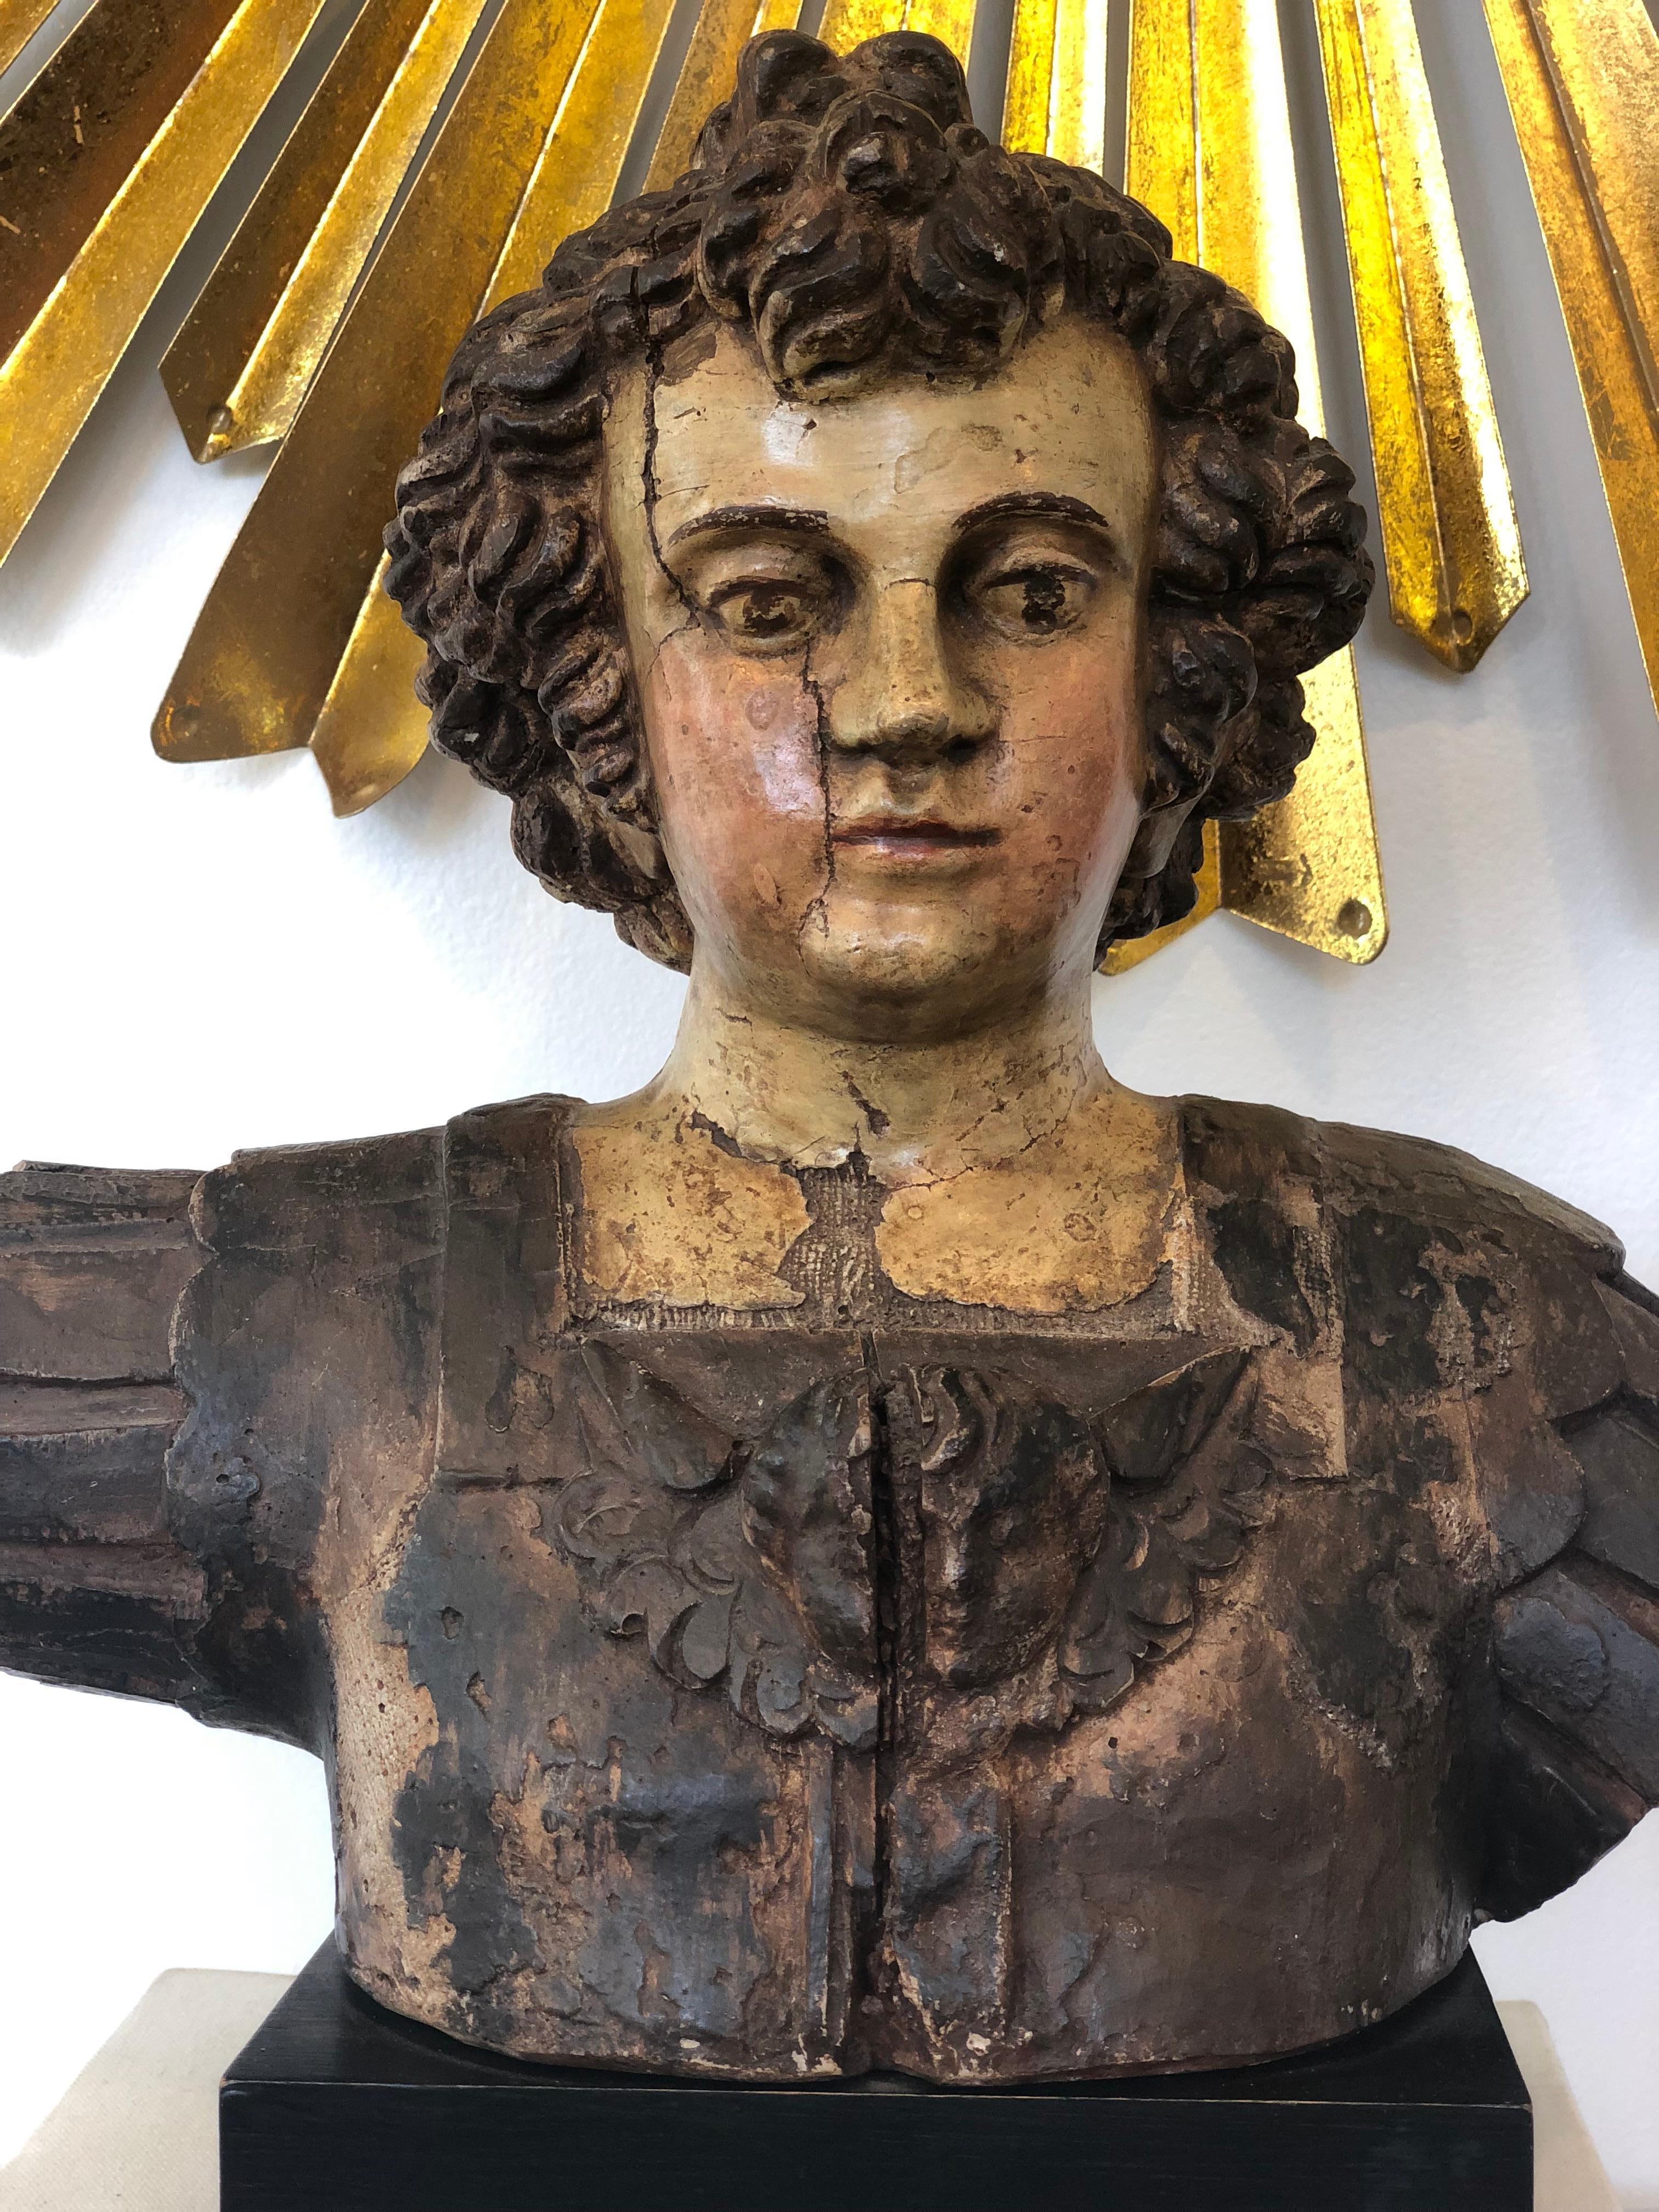 Italian Bust of an Angel in Armor clothing. Wonderful hair and detail in this stunning 18th Century piece.